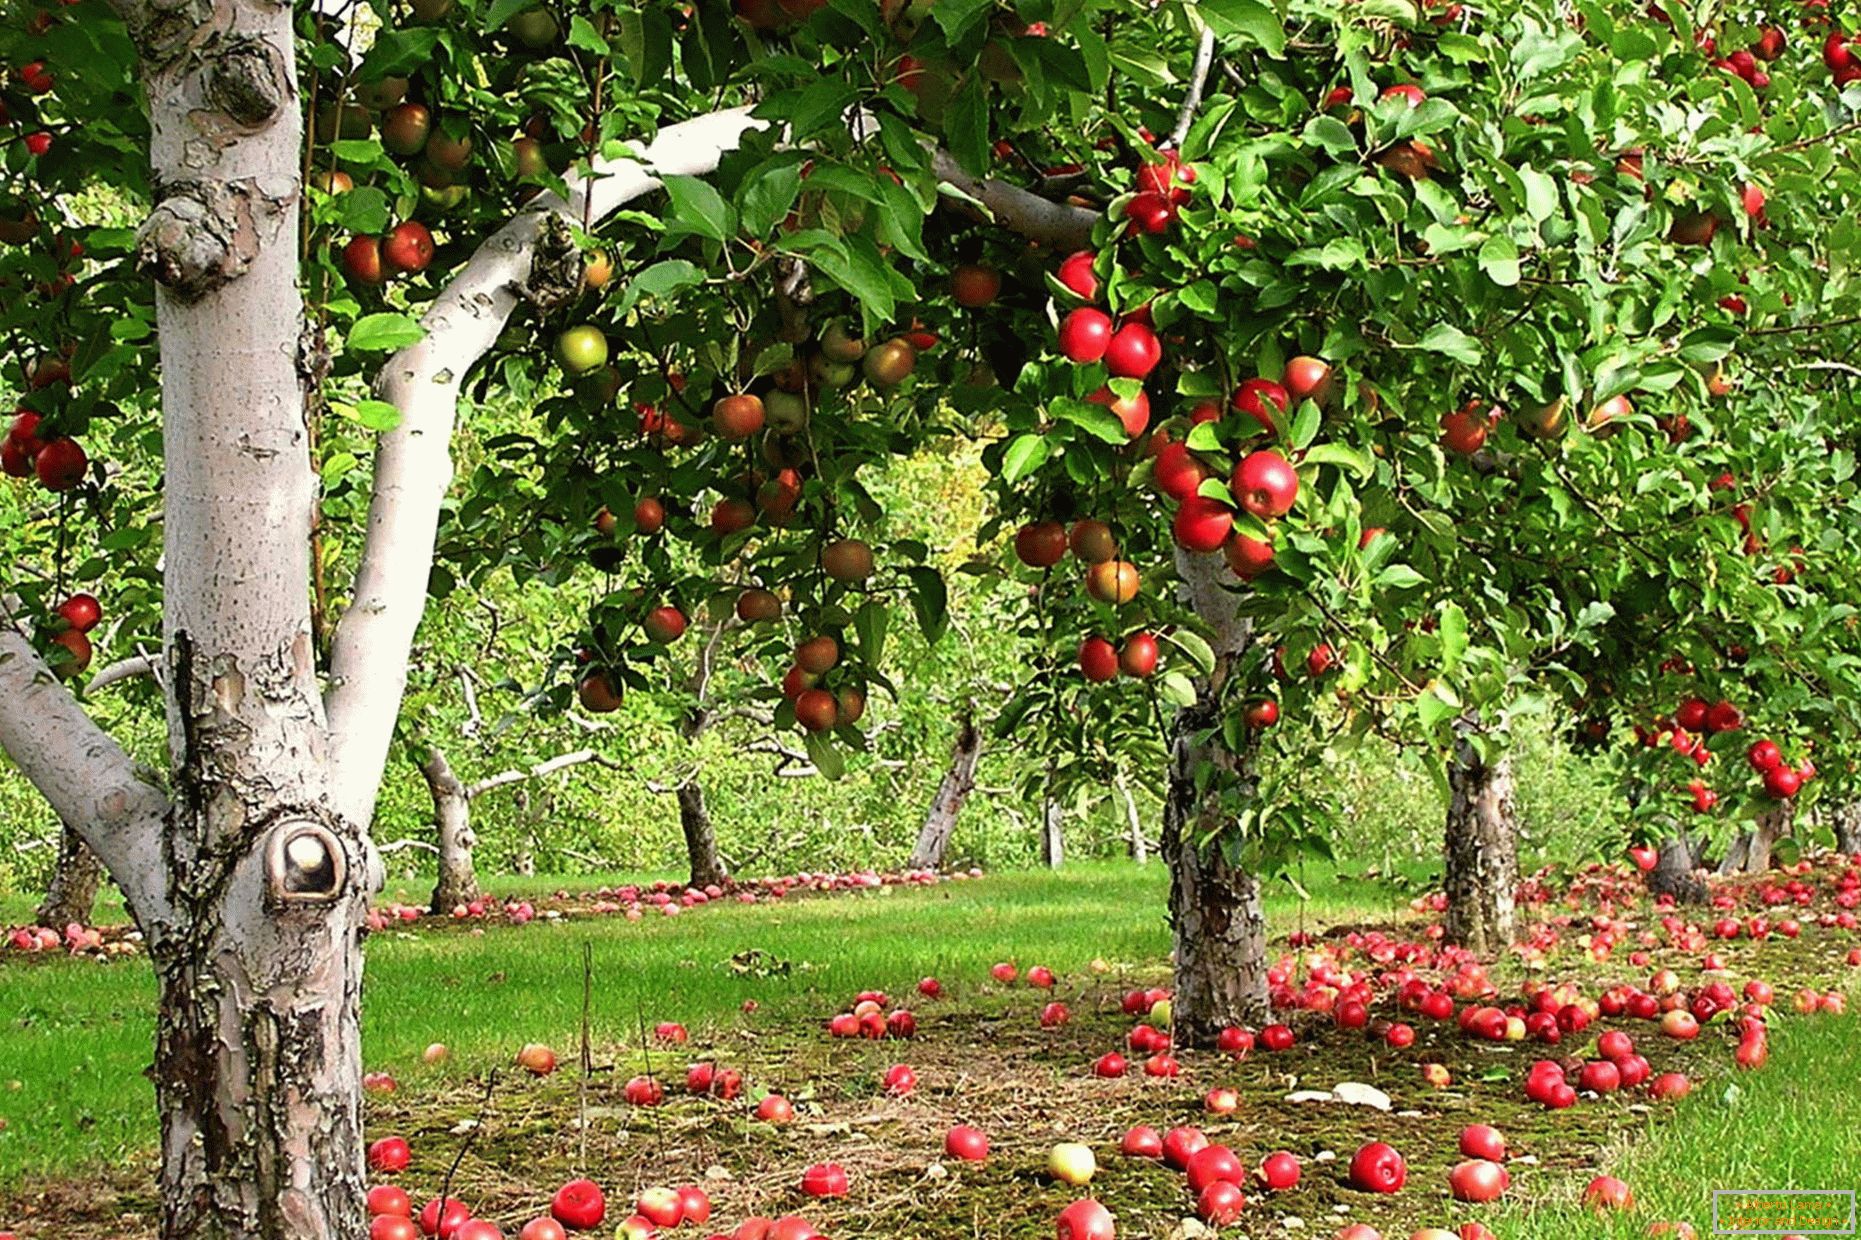 Apple-tree garden in the country